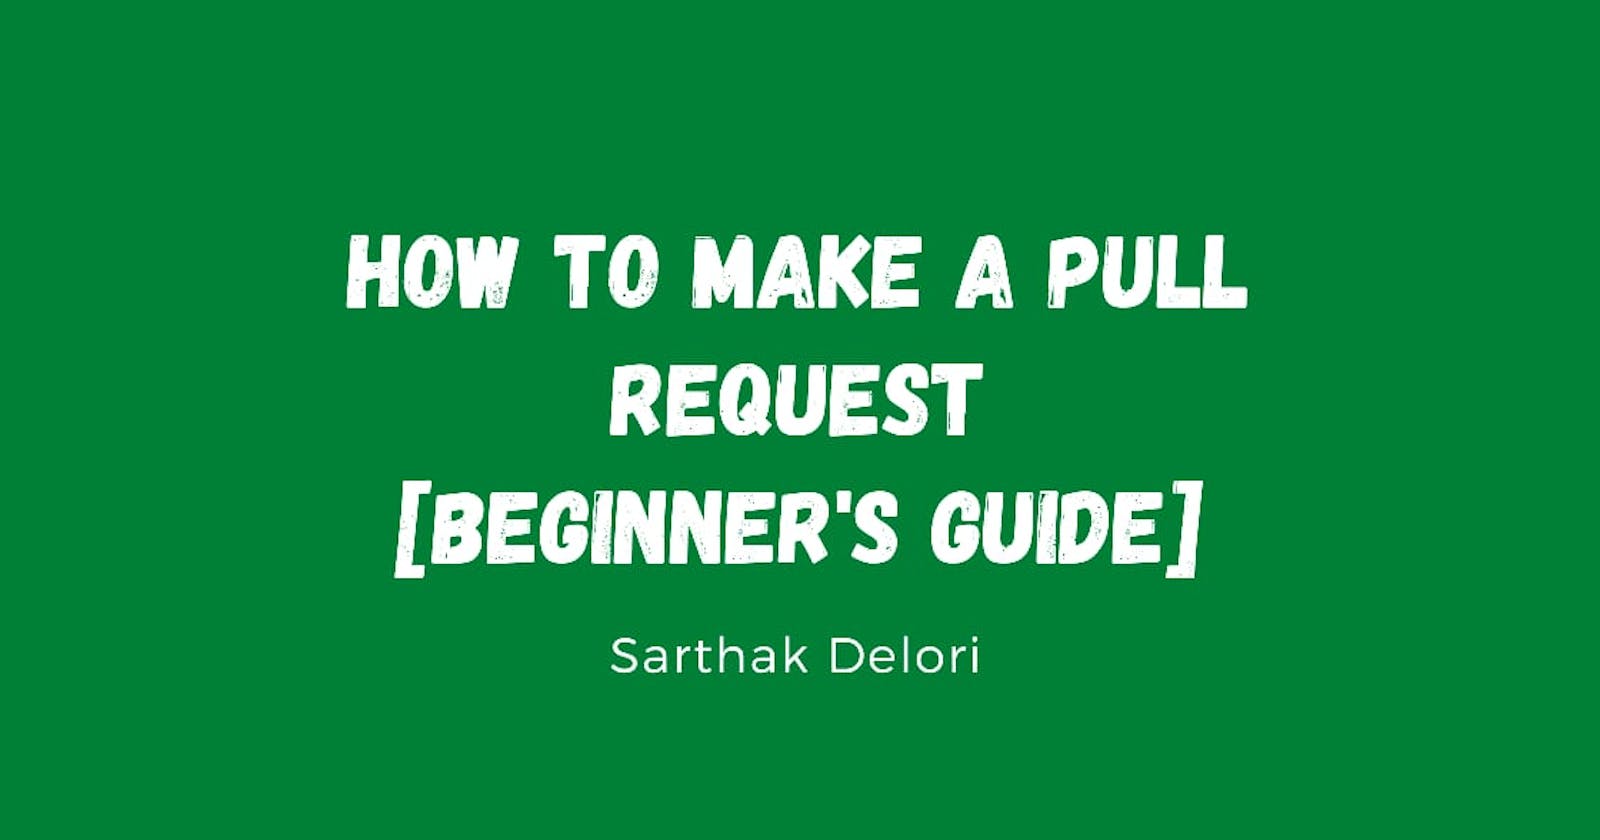 Beginner's Guide on How to make a PR